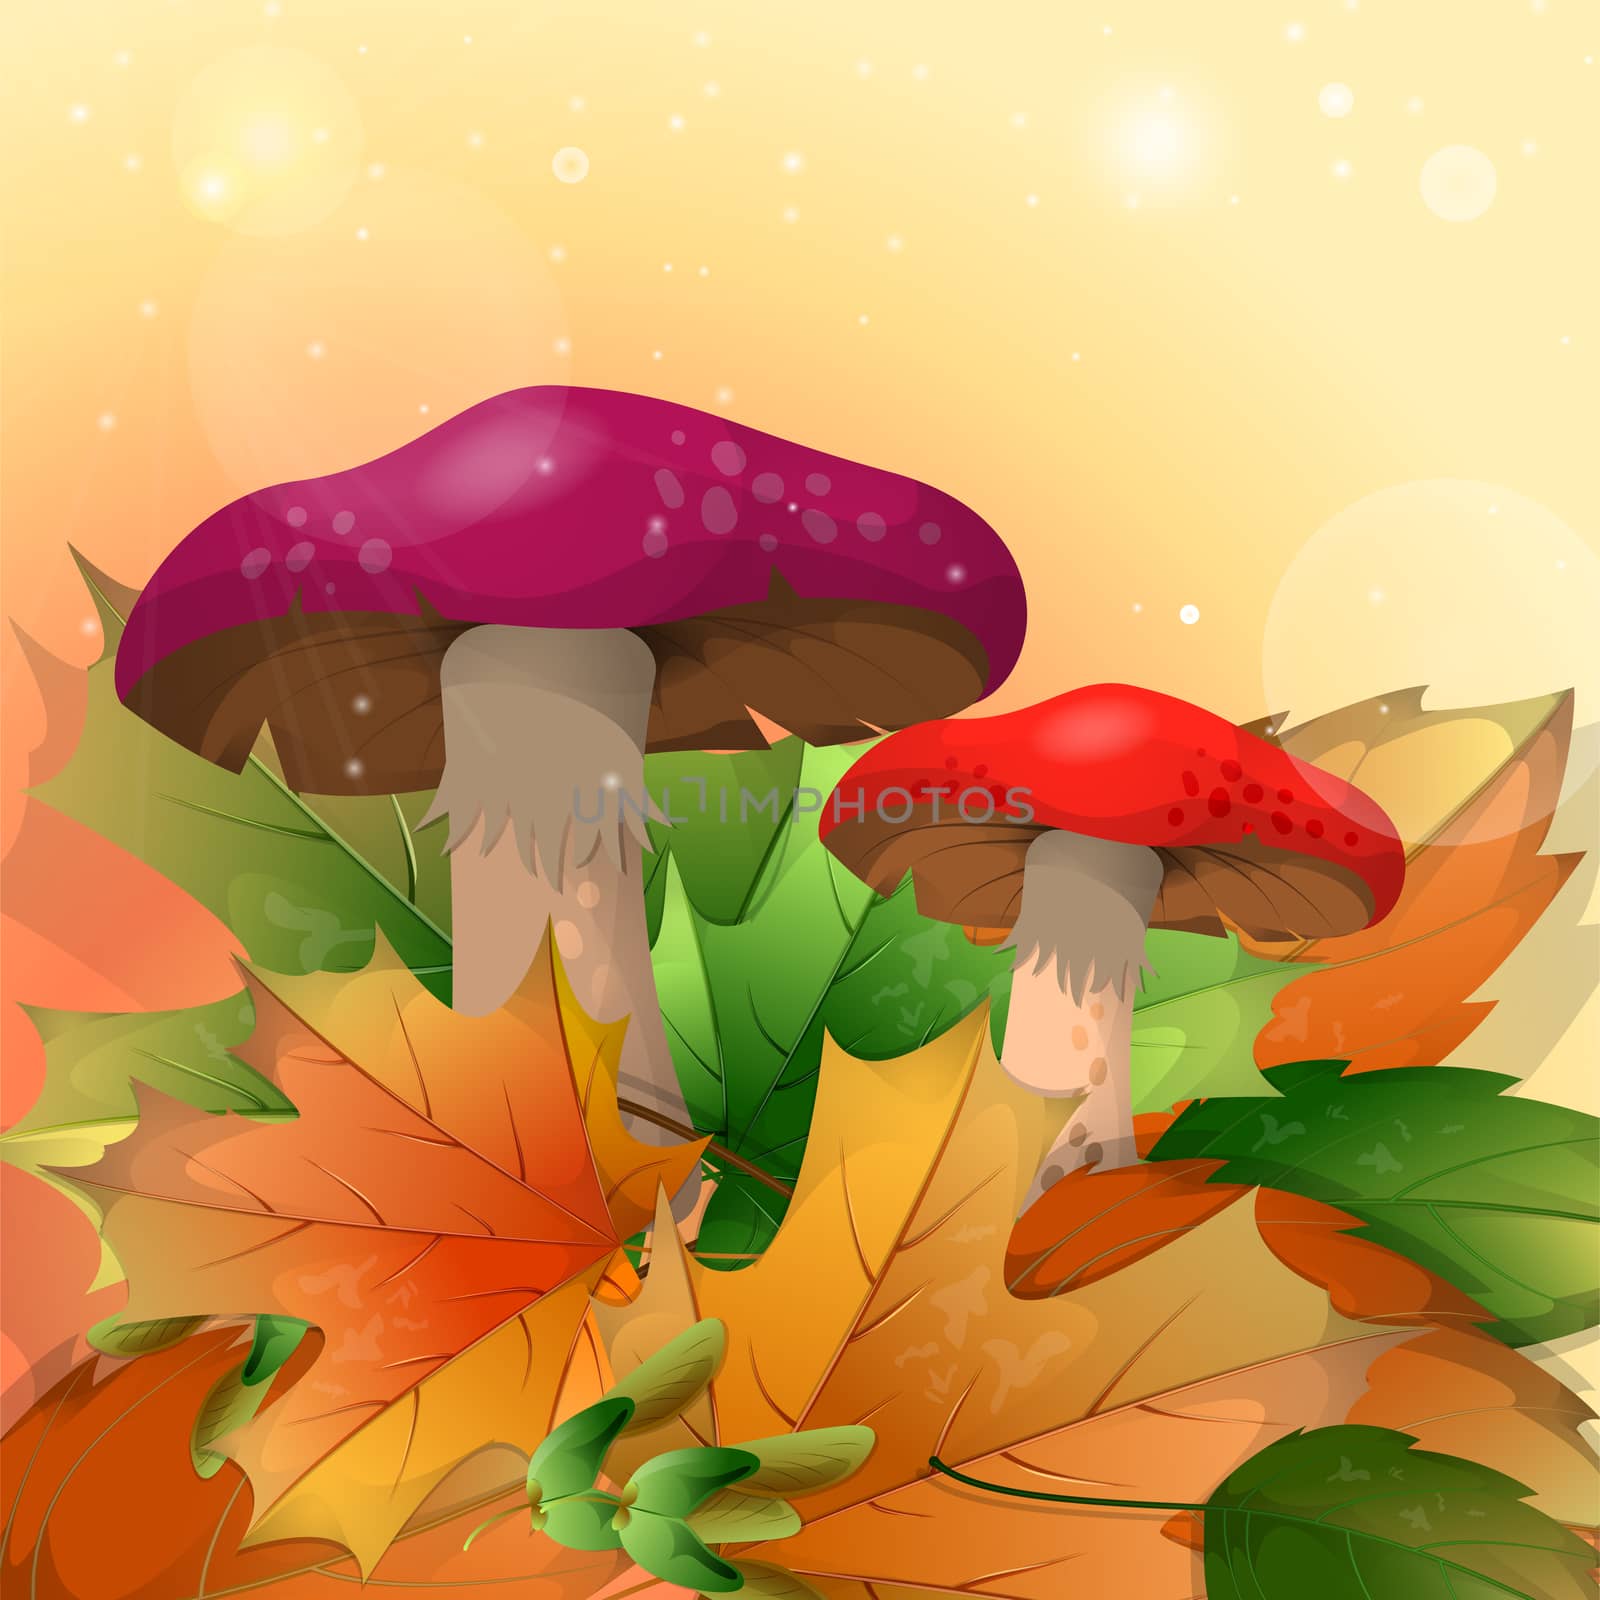 Red mushrooms and autumn leaves on a light background. illustration